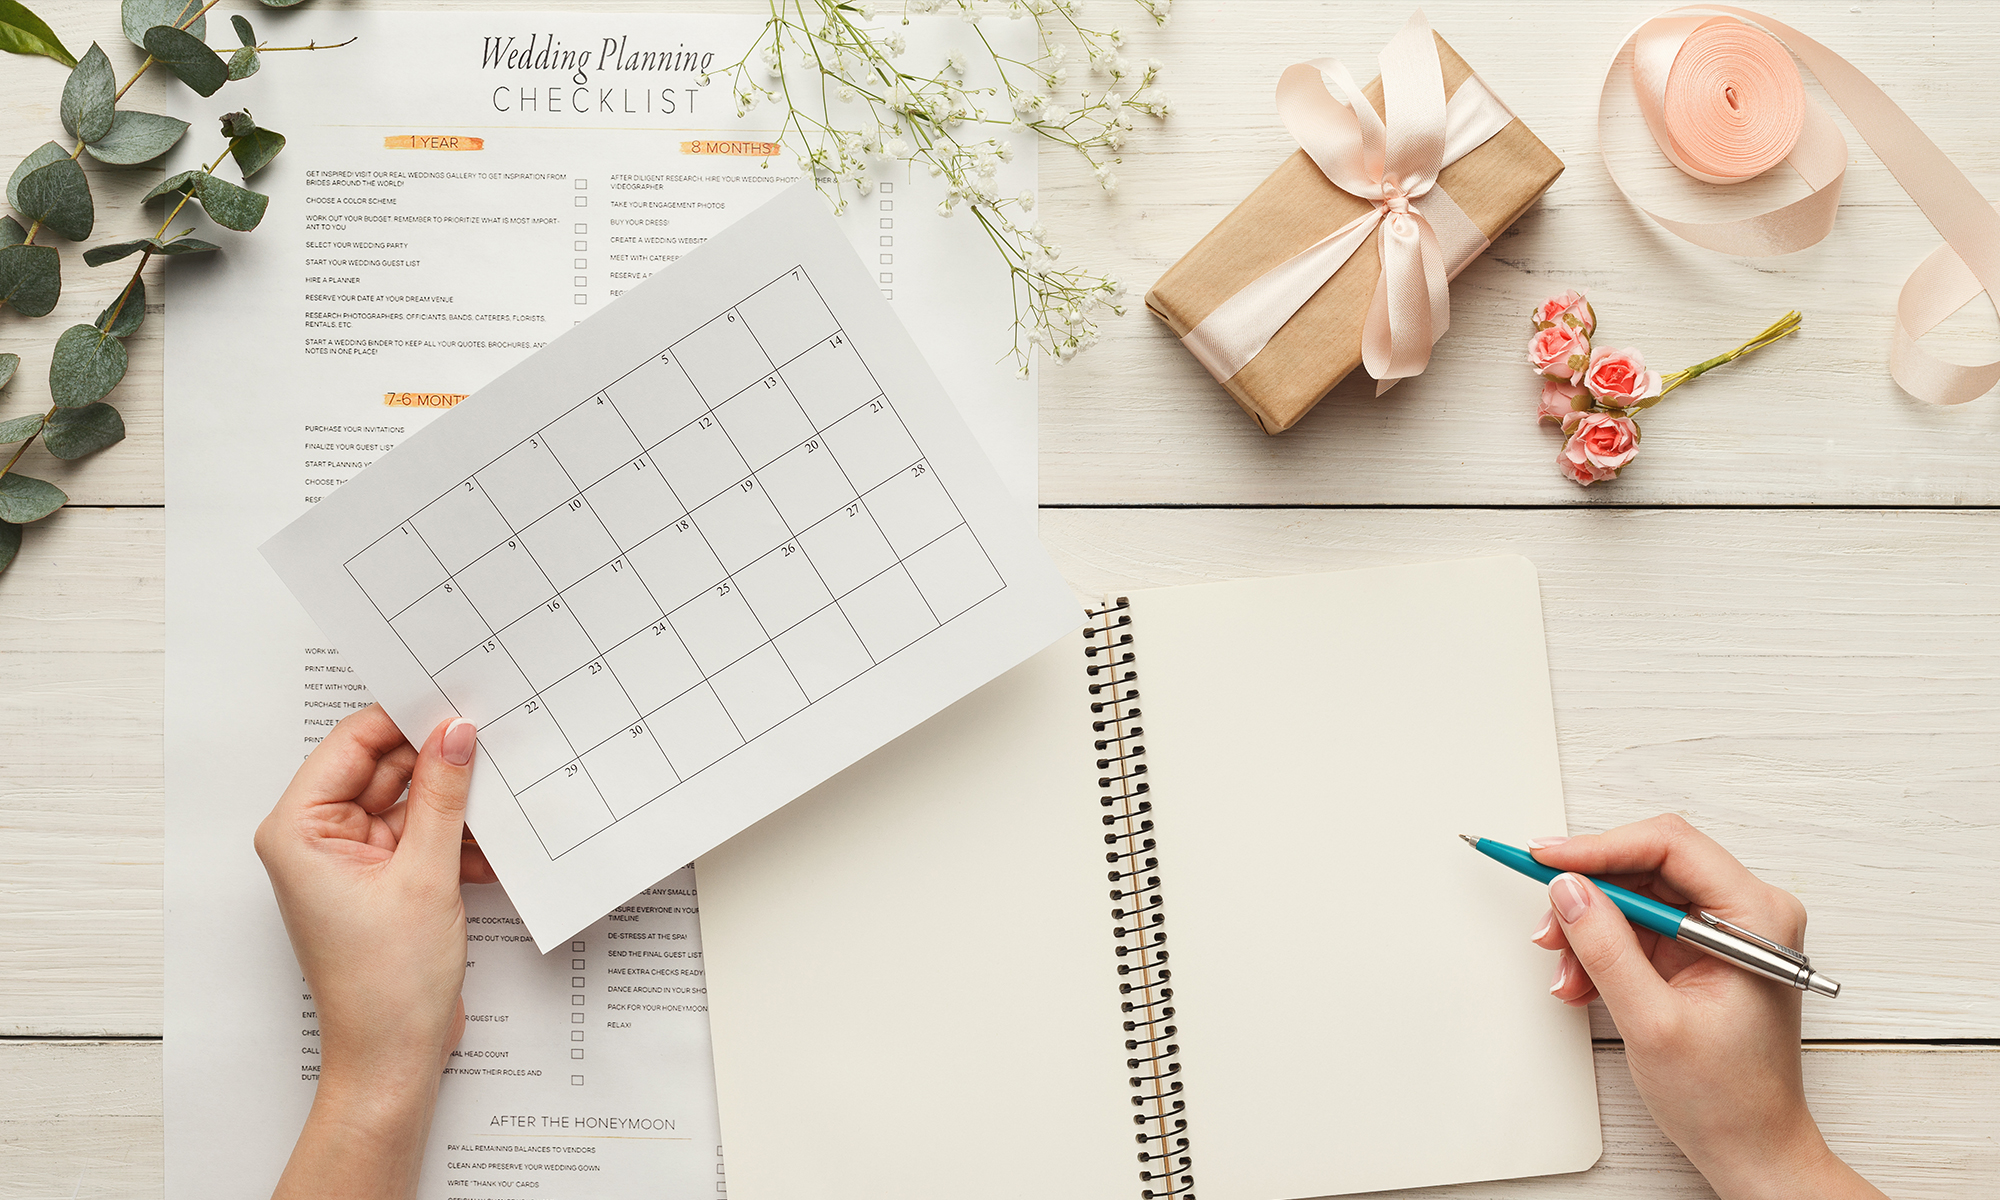 7 Questions to Ask Before Committing to a Wedding Planning Timeline